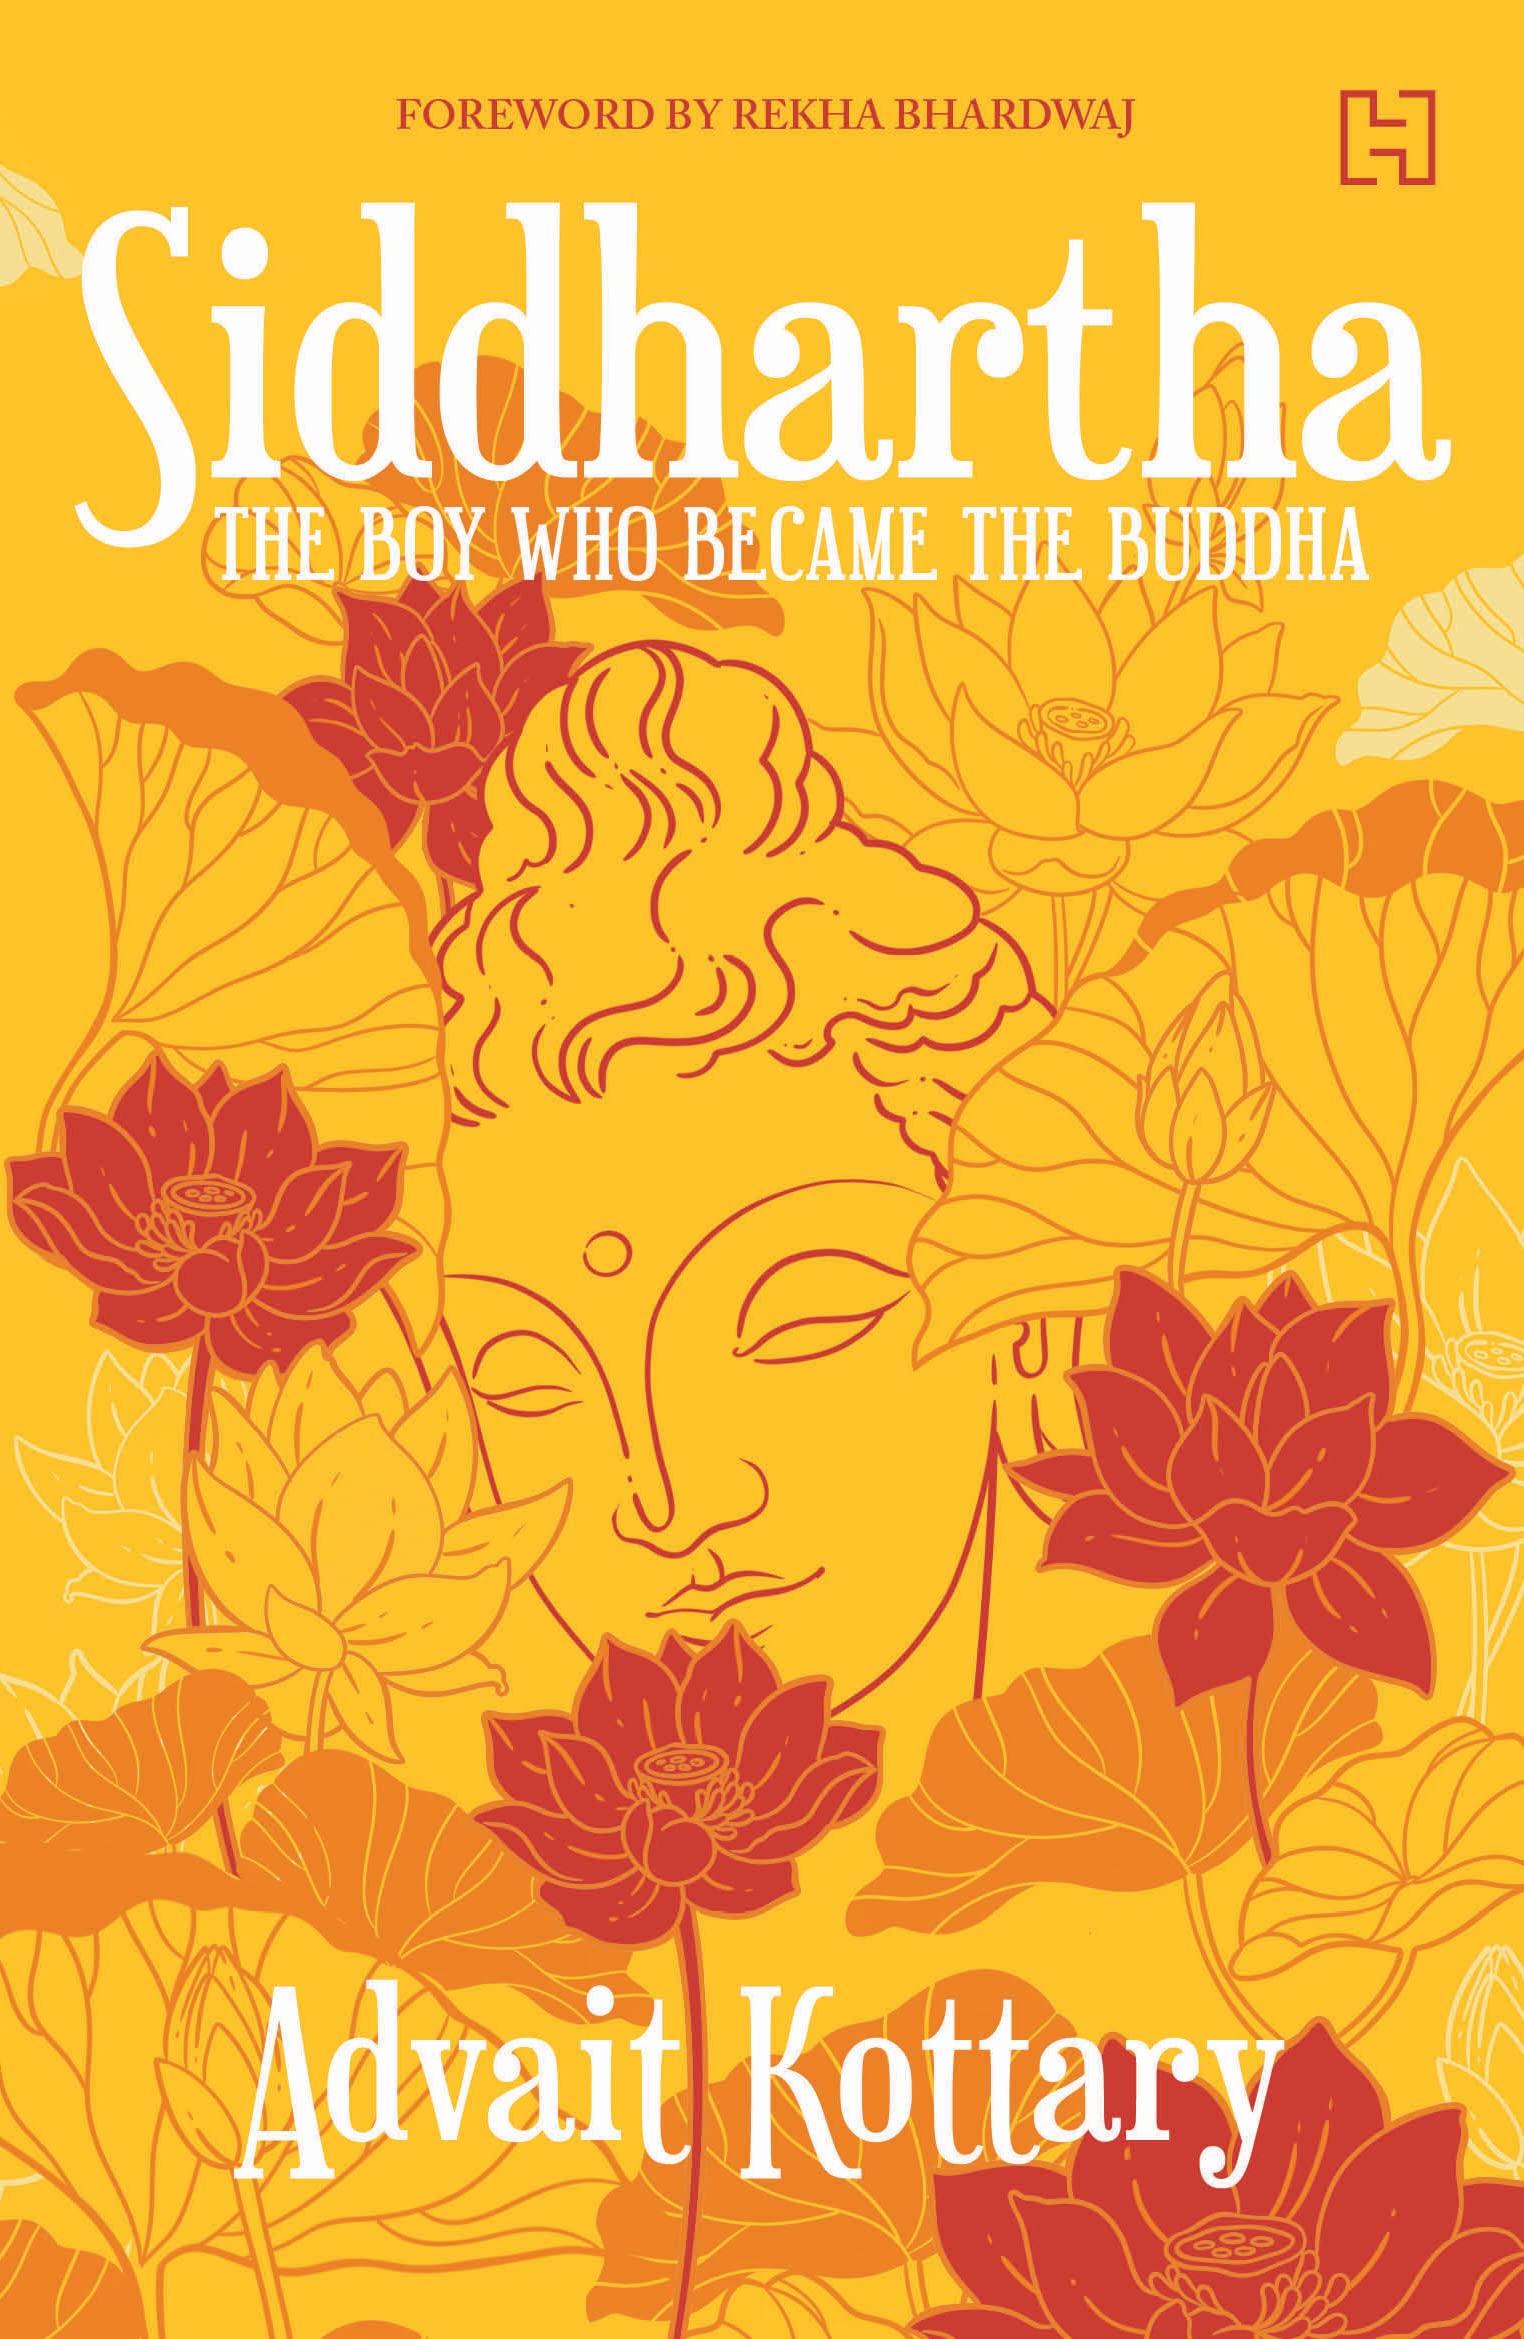 "Siddhartha": Advait Kottary's novel takes readers on a fictional journey through Buddha’s formative years